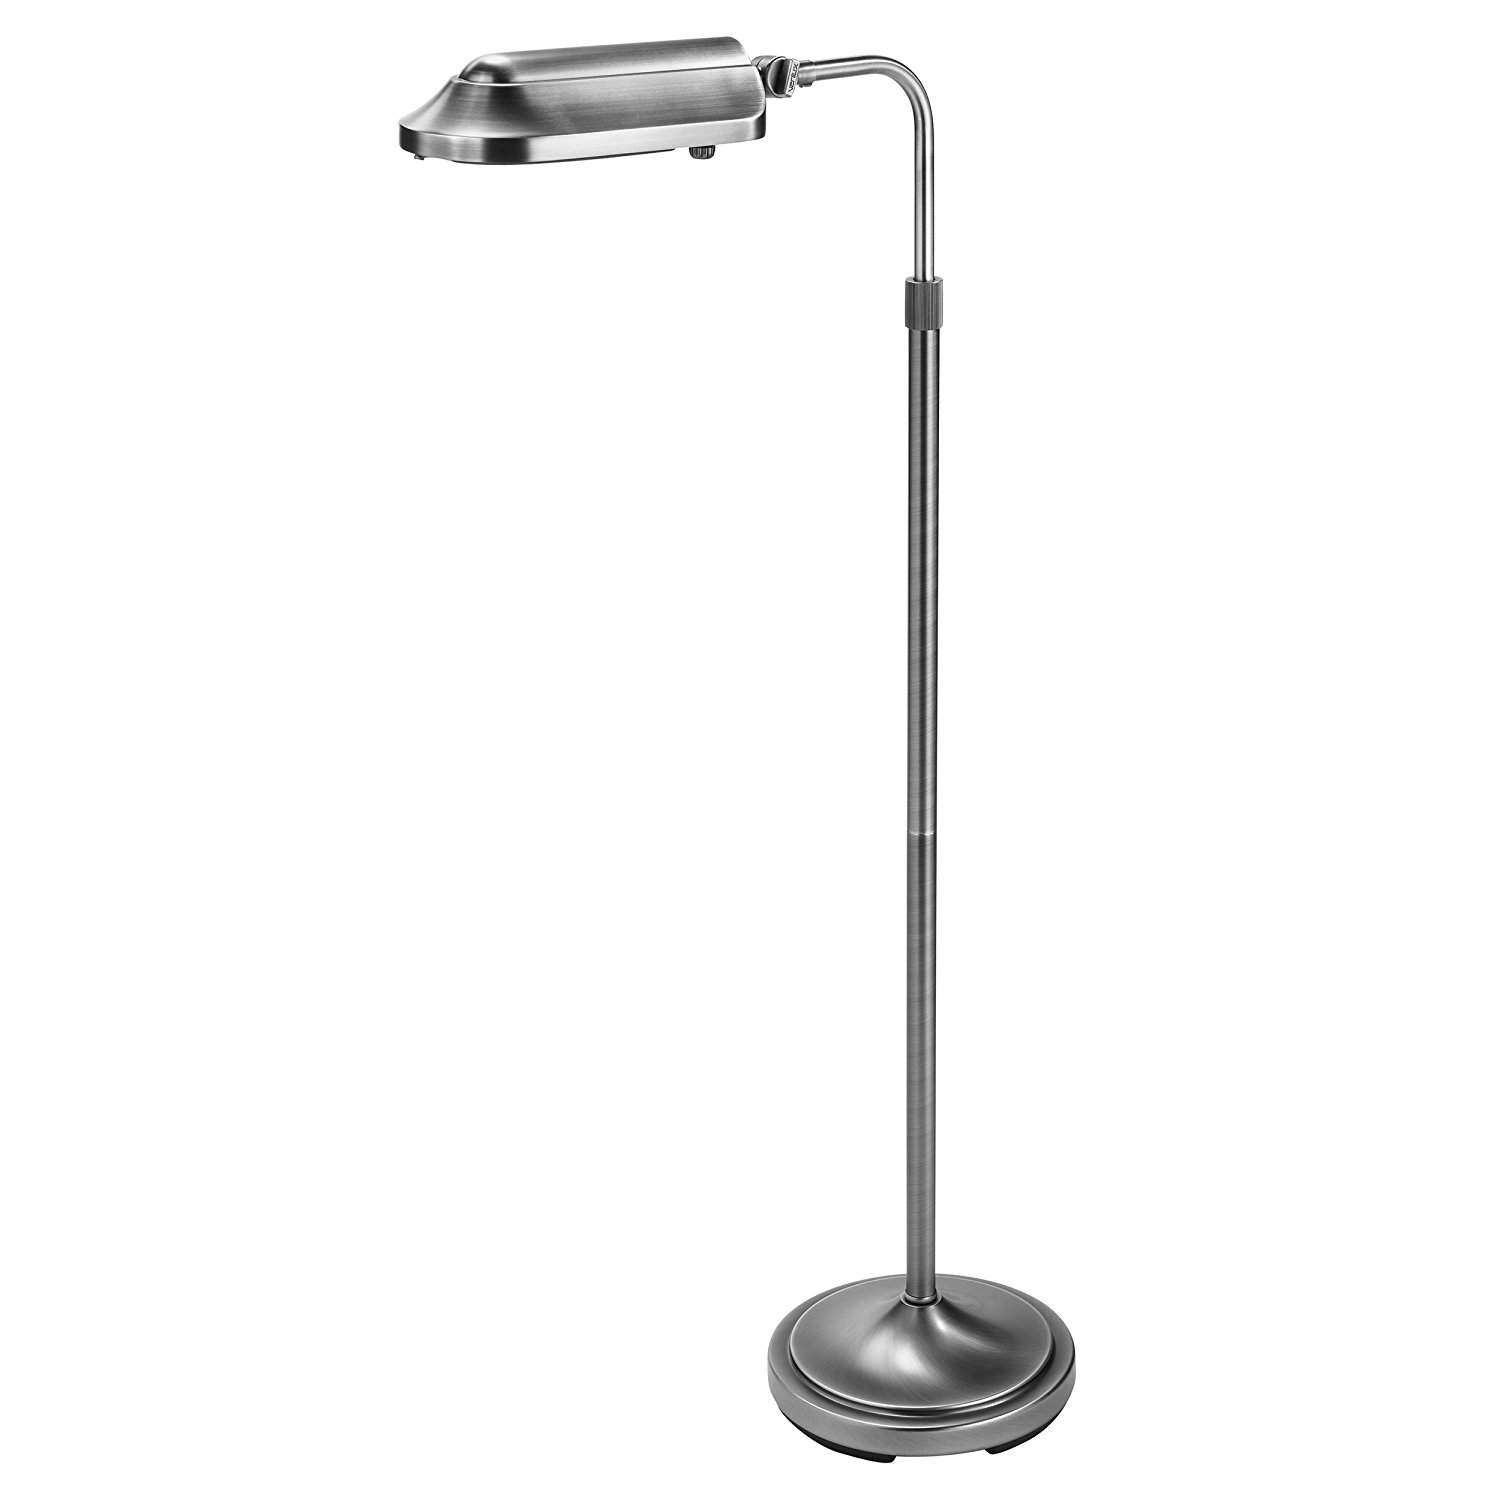 Verilux Natural Spectrum Floor Lamp Review throughout sizing 1500 X 1500